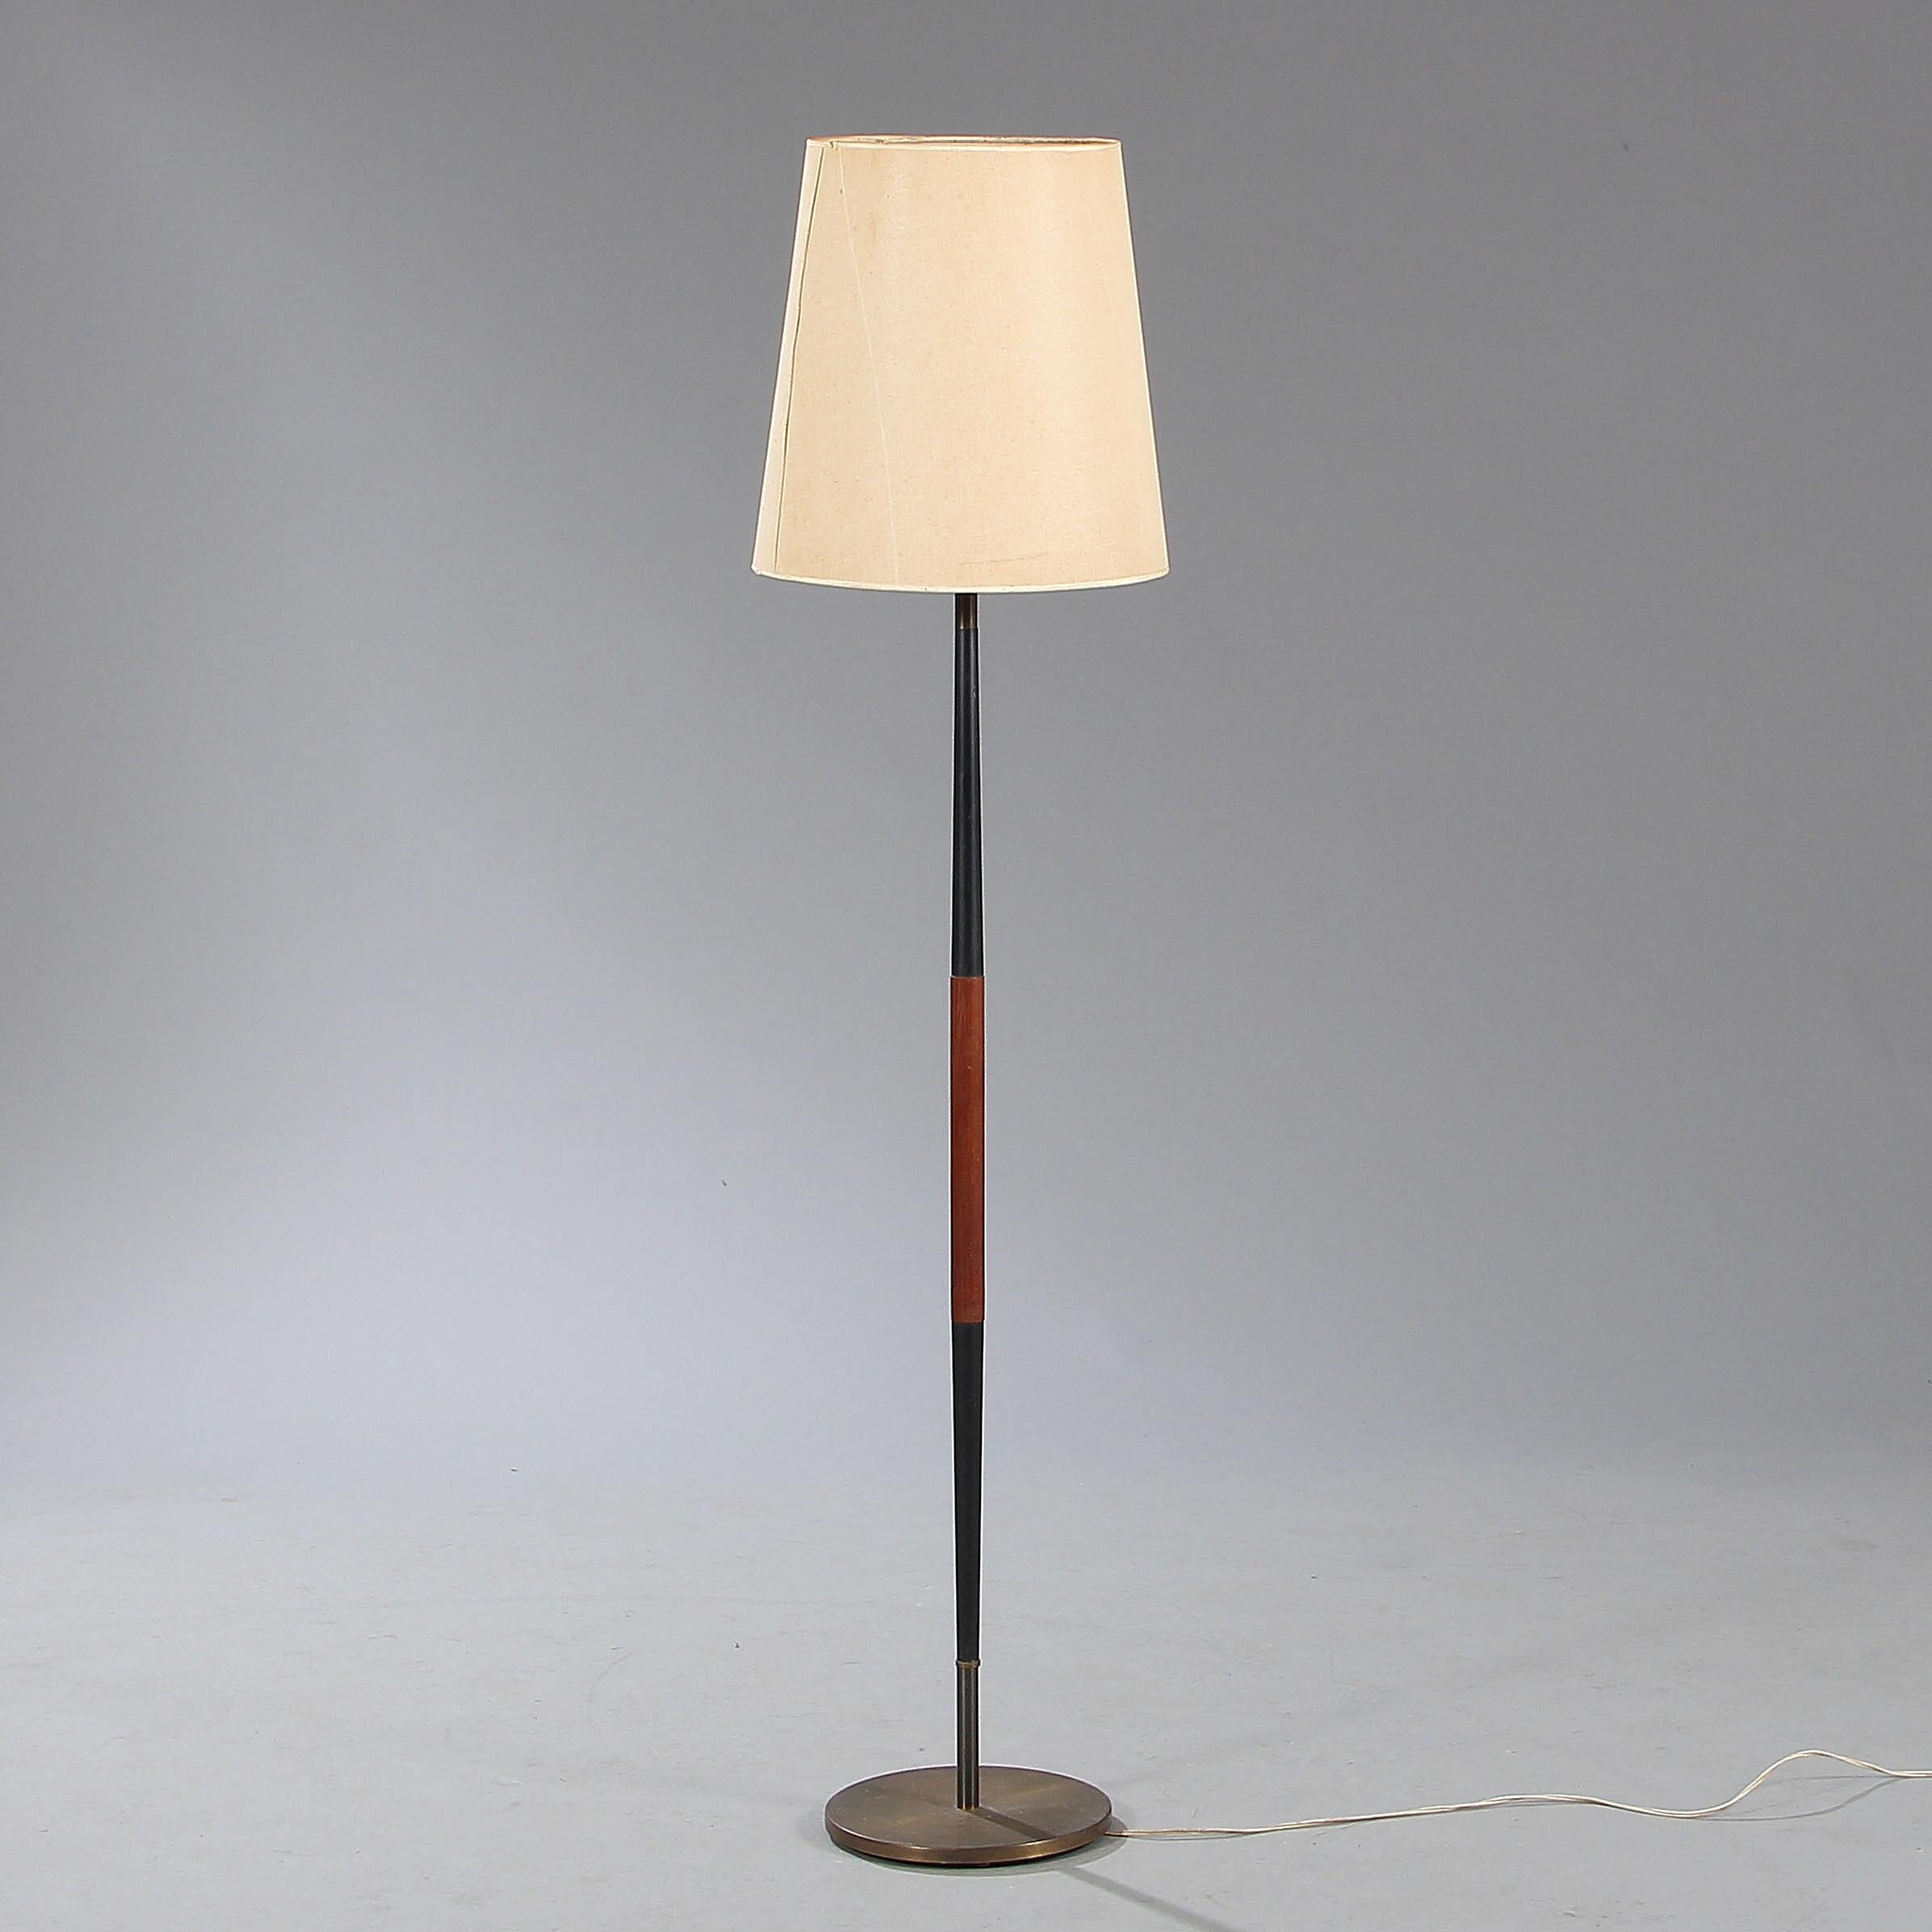 Danish design: Floor lamp. Brass, teak and black lacquered metal. Measures: H. 167 cm. Available in sets or individually.